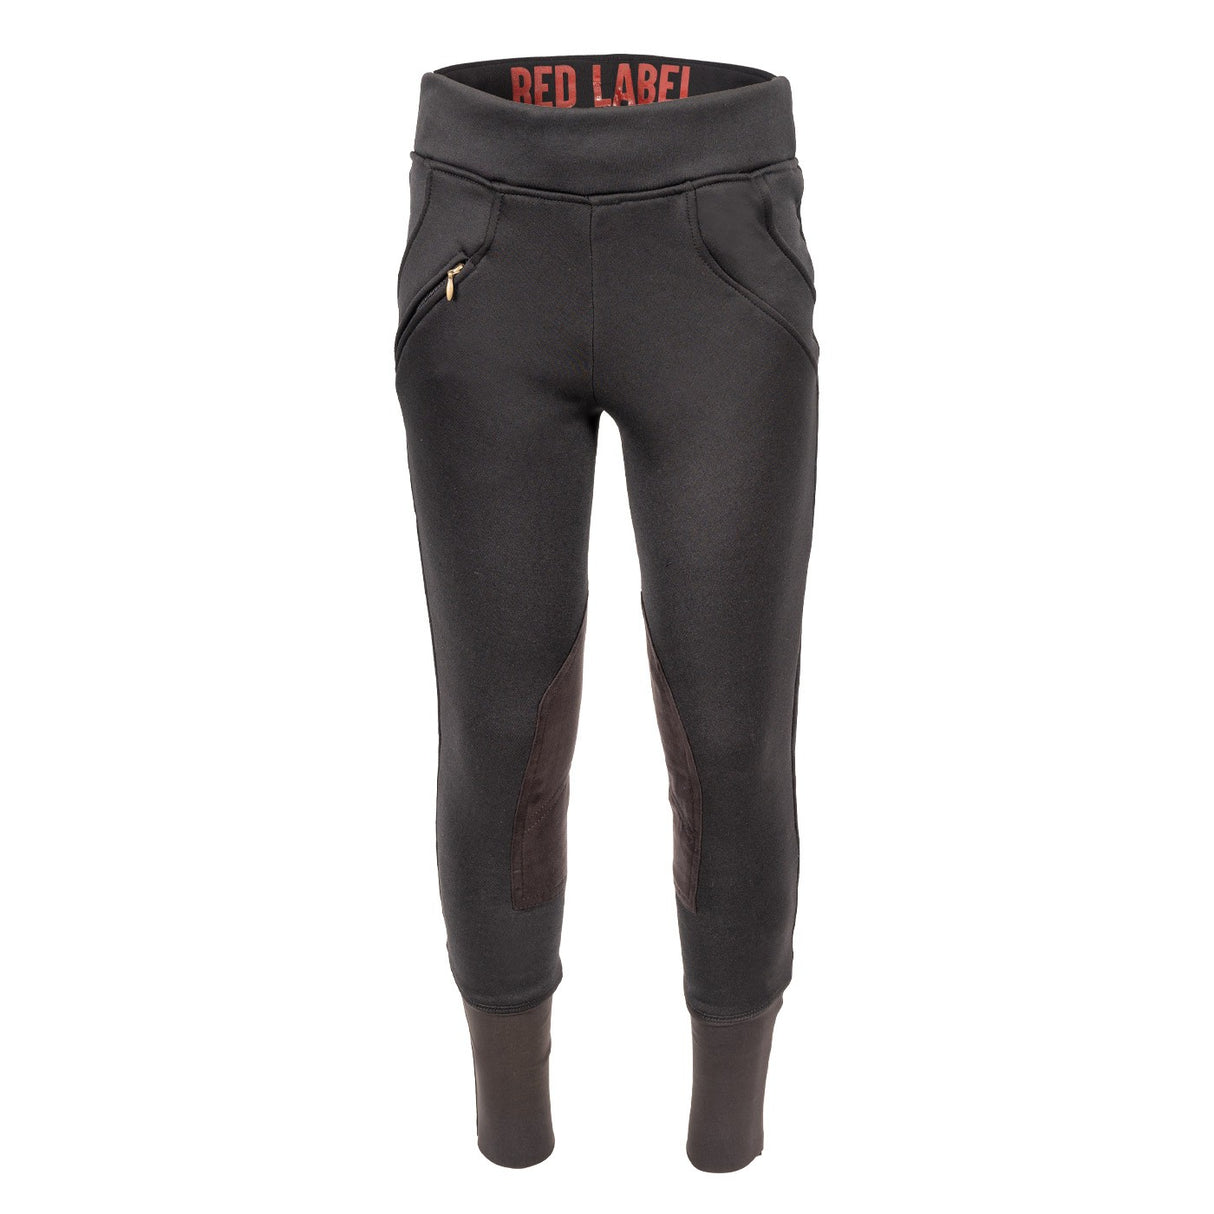 Elation Red Label Active Winter Tight - Kids'